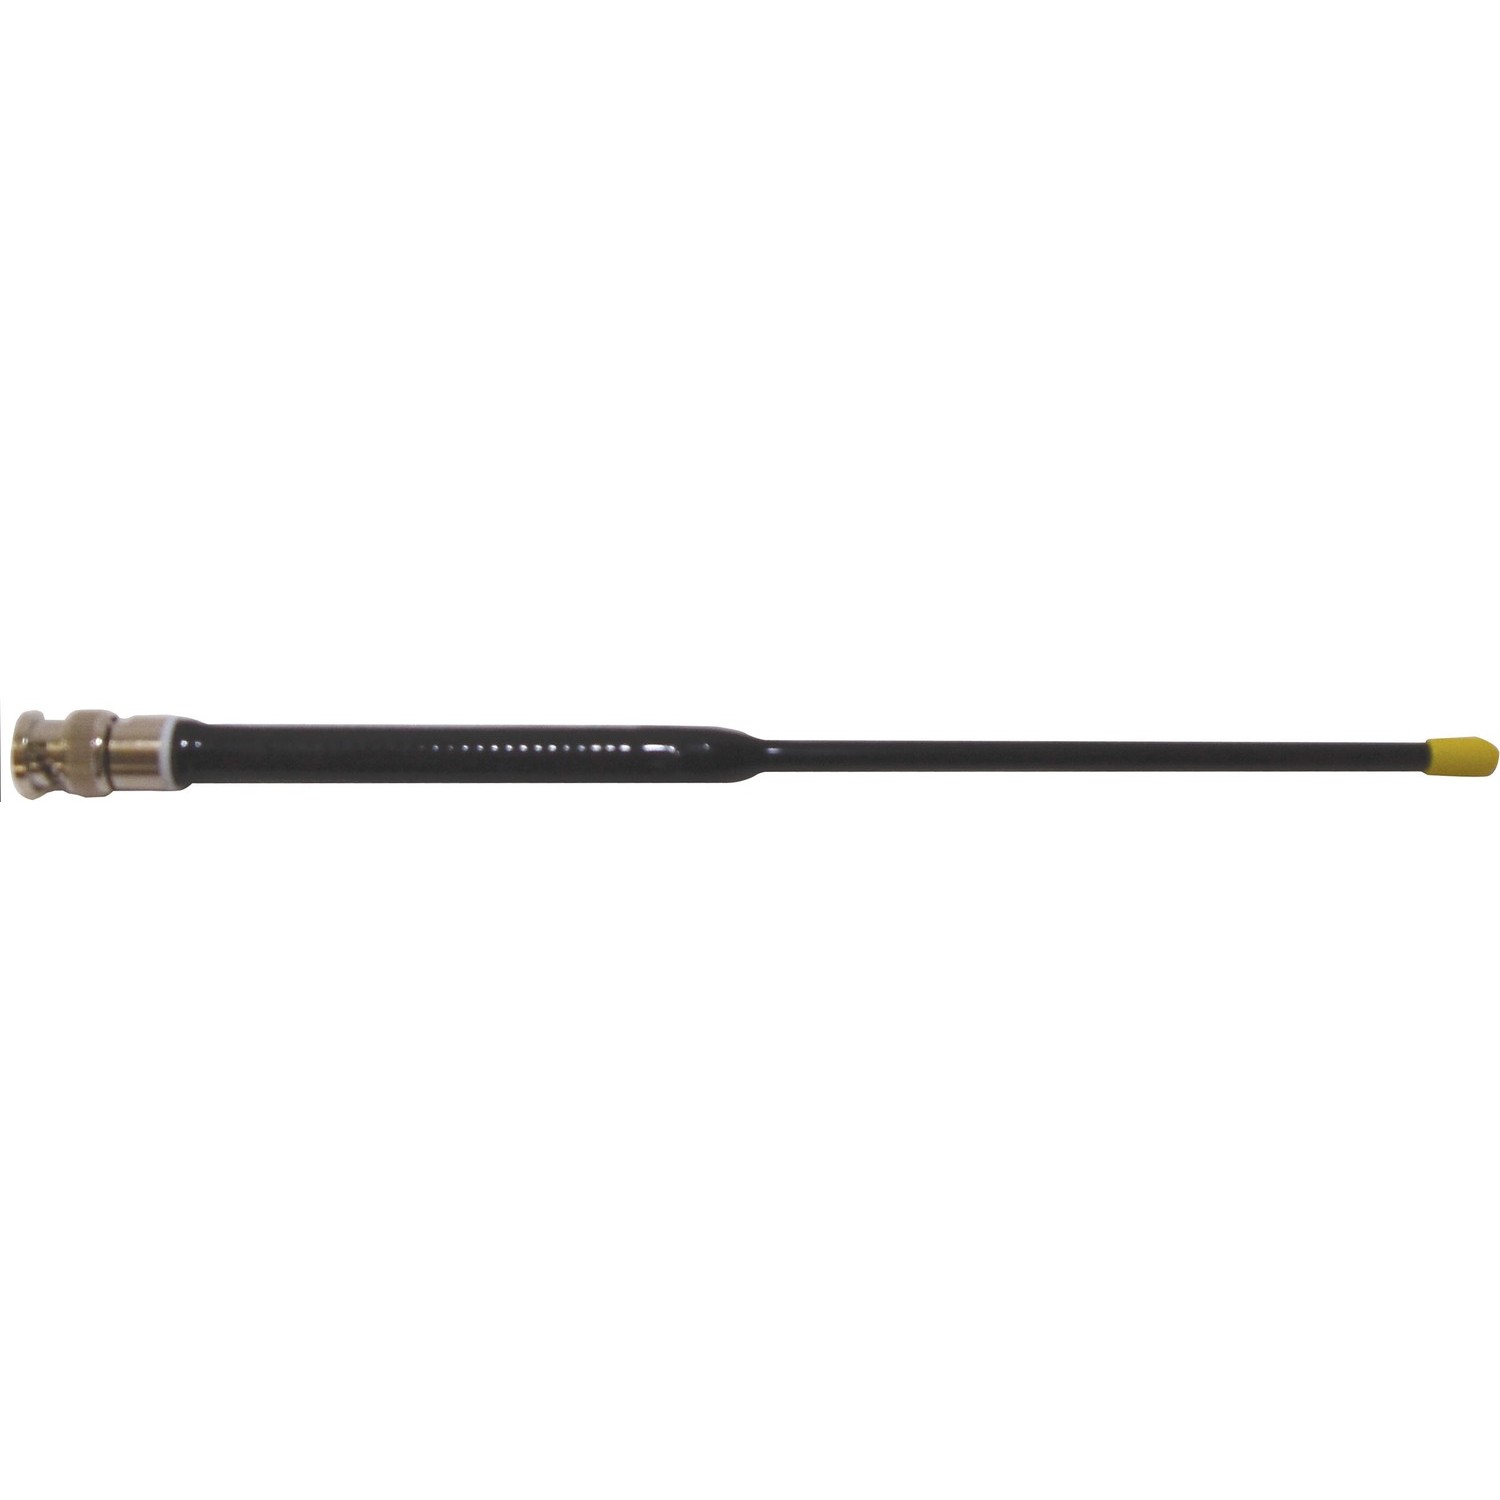 Larsen- 11.25" Tall 1504 Mhz 1/4 Wave Helical Rubber Duck Antenna With Bnc Fitting